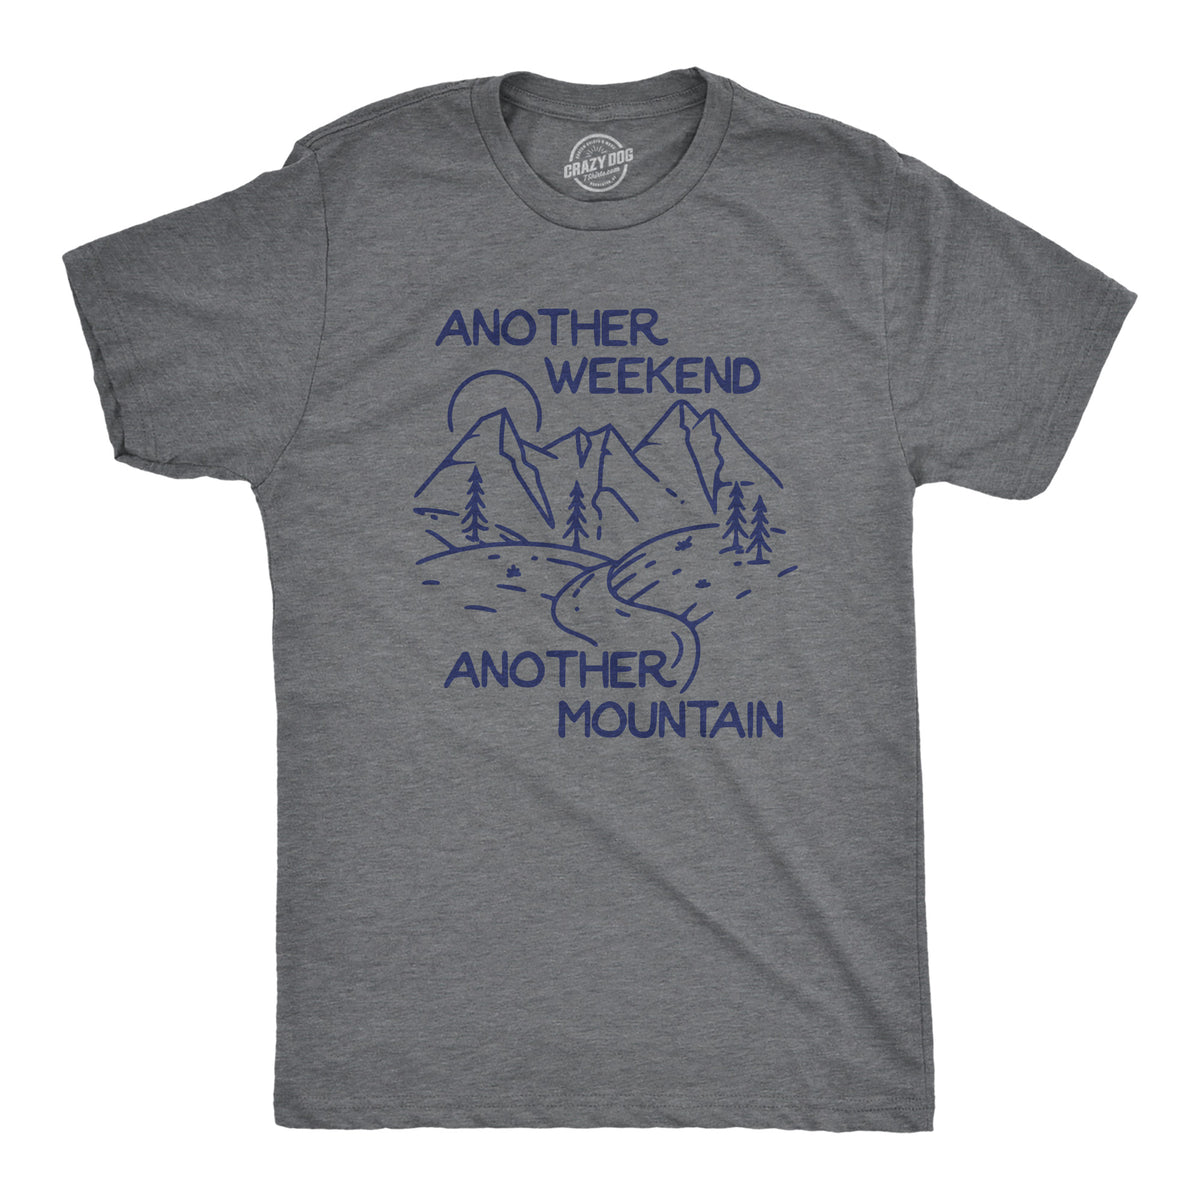 Funny Dark Heather Grey - WEEKEND Another Weekend Another Mountain Mens T Shirt Nerdy Camping Tee